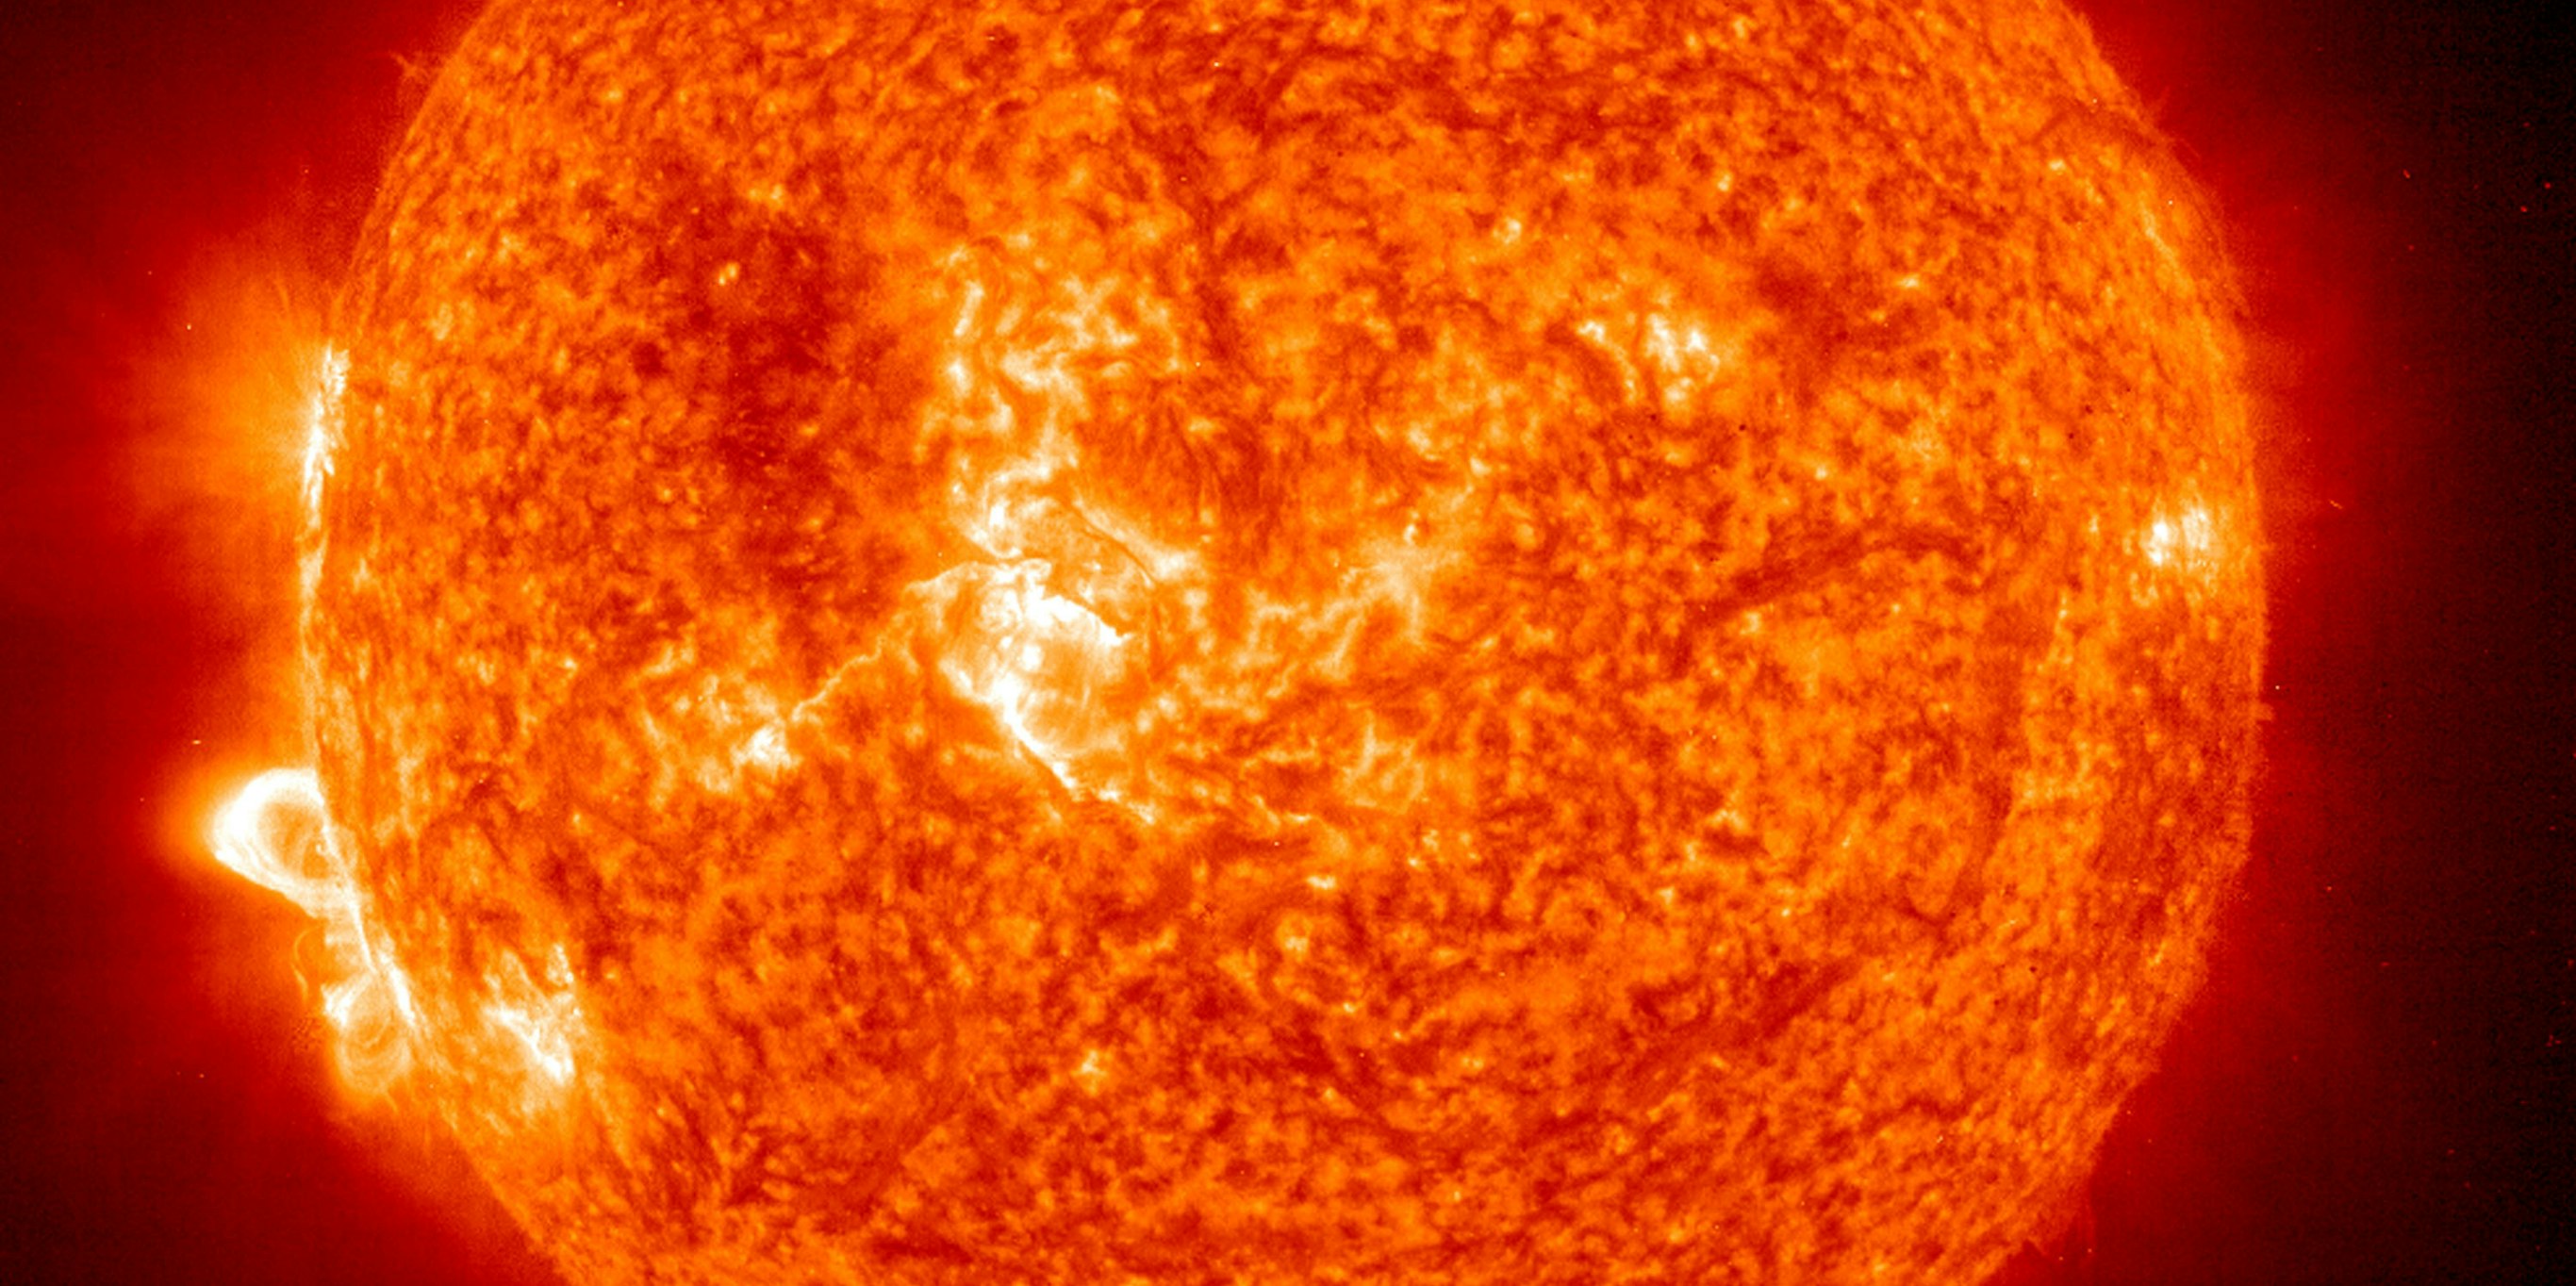 In this handout photo provided by NASA, a Solar and Heliospheric Observatory image shows Region 486 that unleashed a record flare last week (lower left) November 18, 2003 on the sun. The spot itself cannot yet be seen but large, hot, gas-filled loops above this region are visible. These post-flare loops are still active.